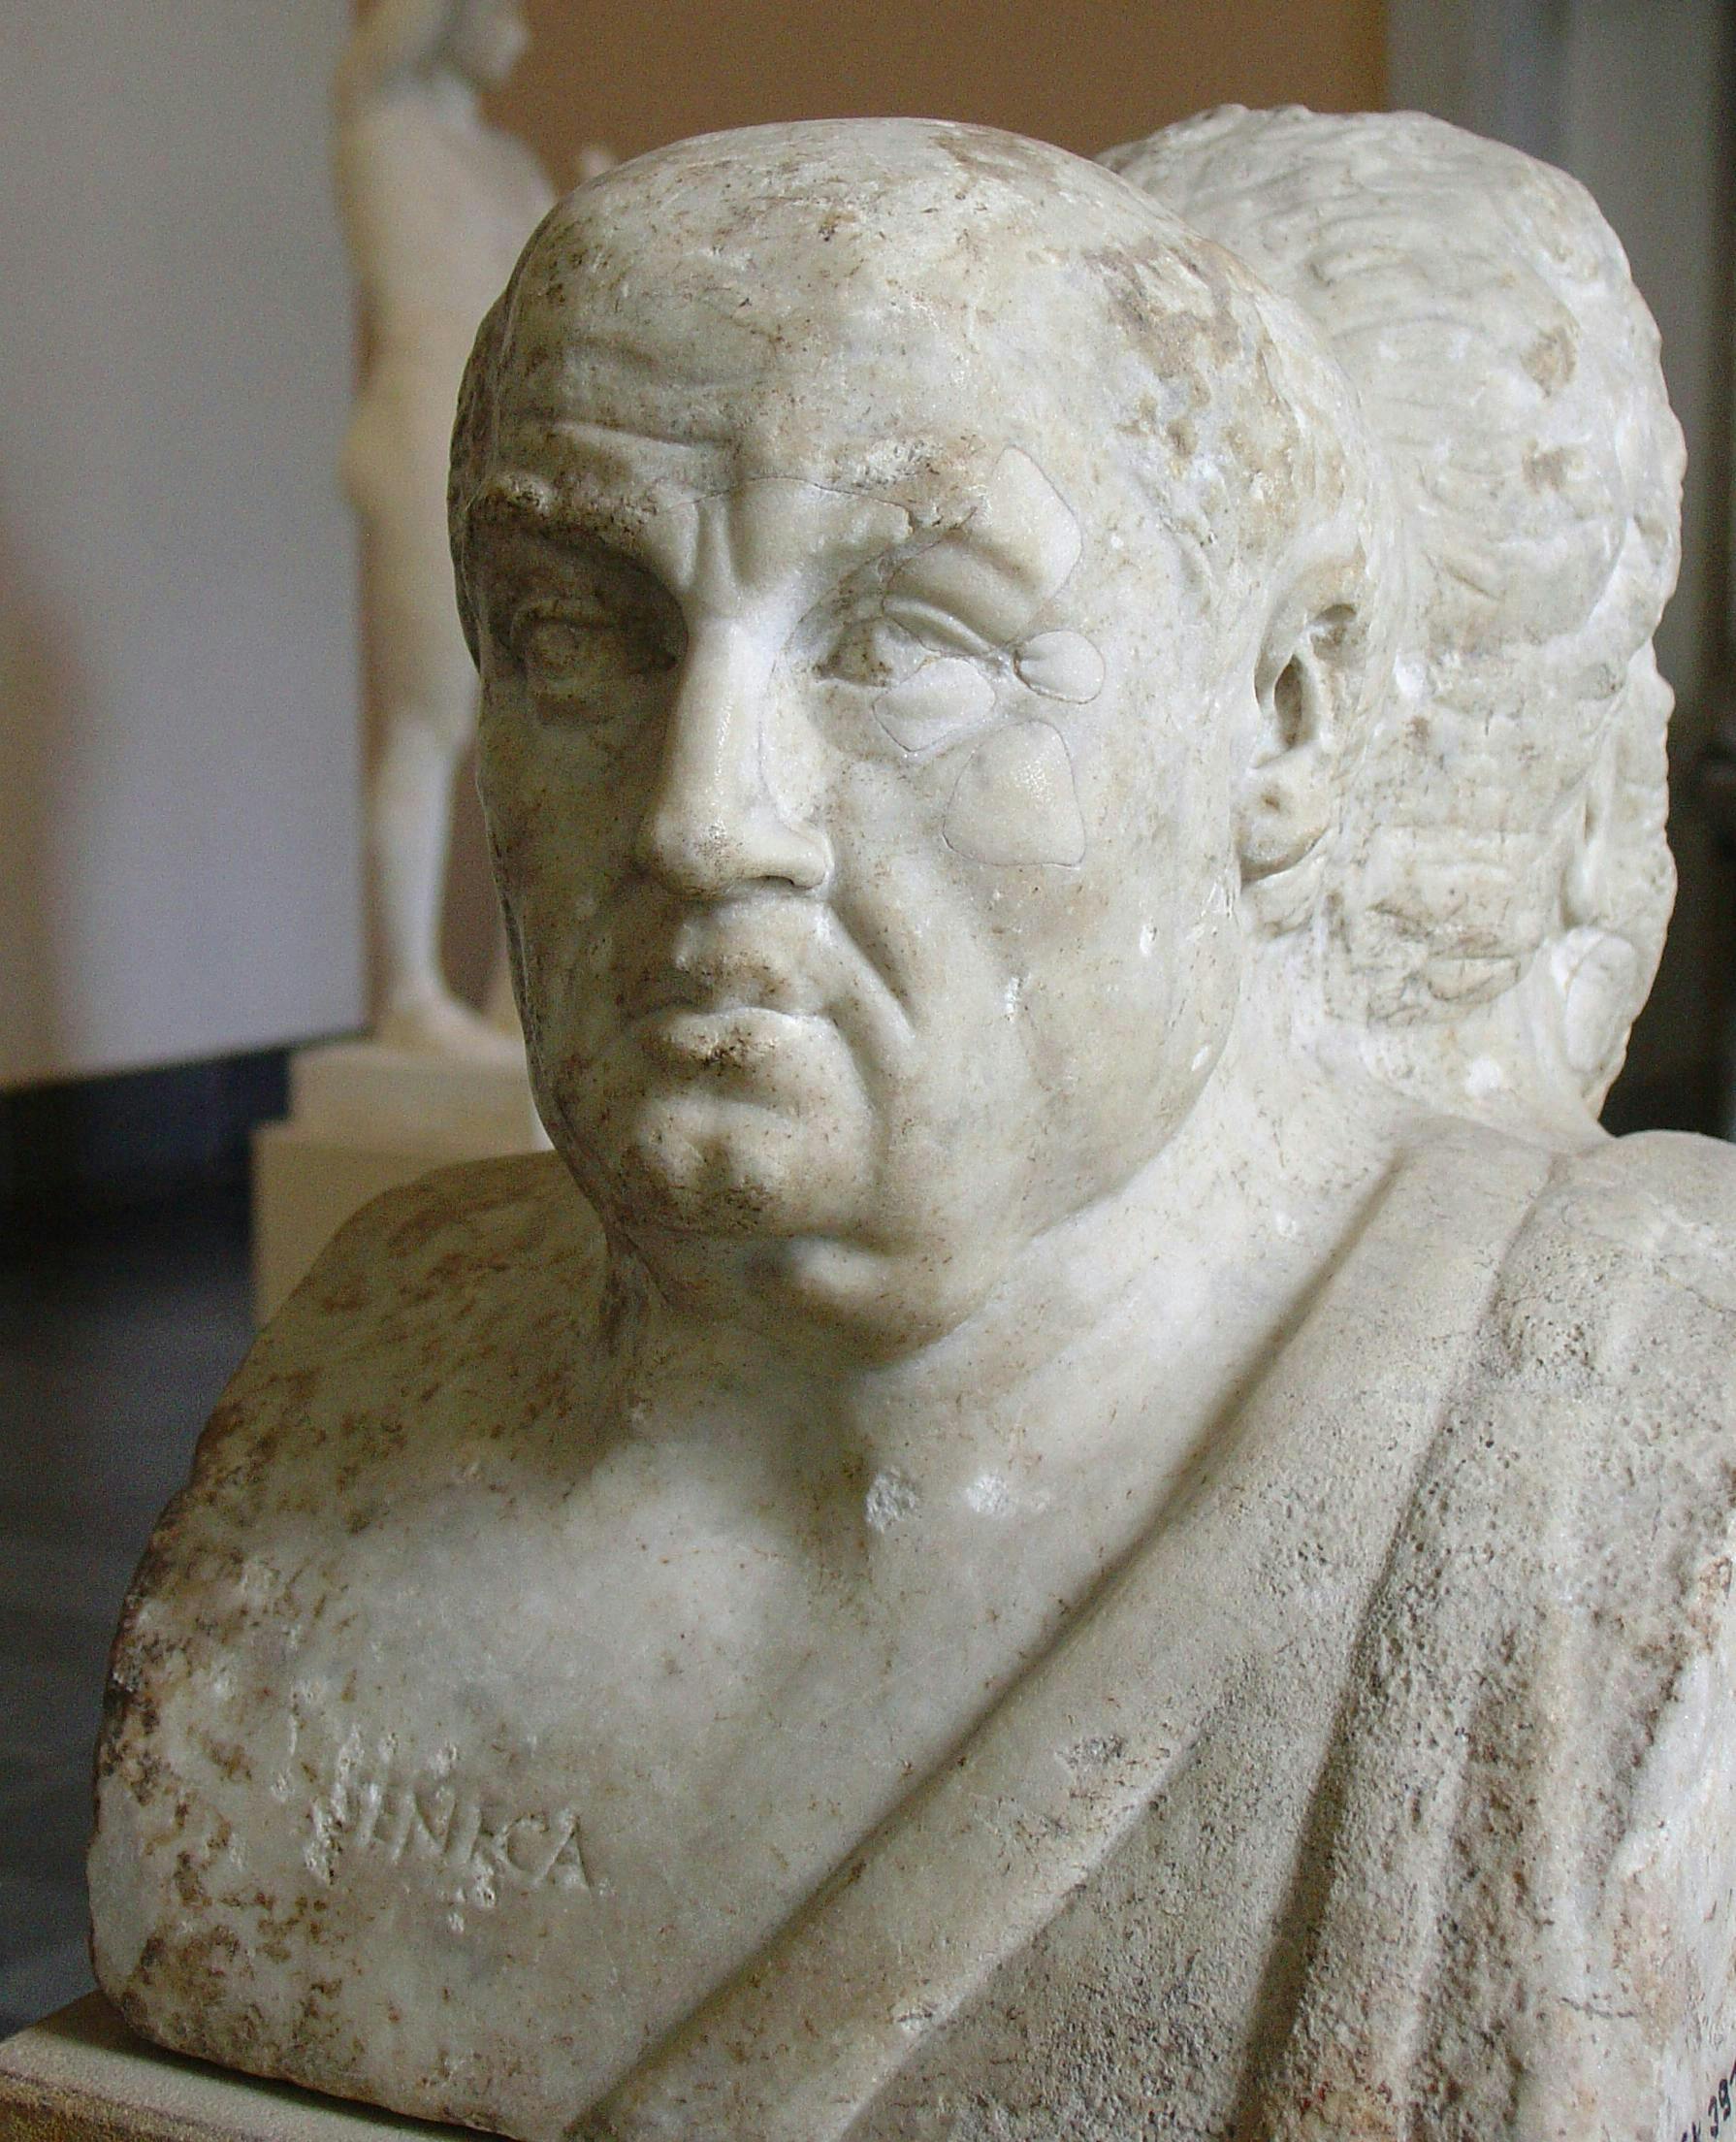 Marble bust portraying an older man with a serious expression in a museum setting, showing partially visible inscription "NIRKA" on the chest; blurred statues are in the background.